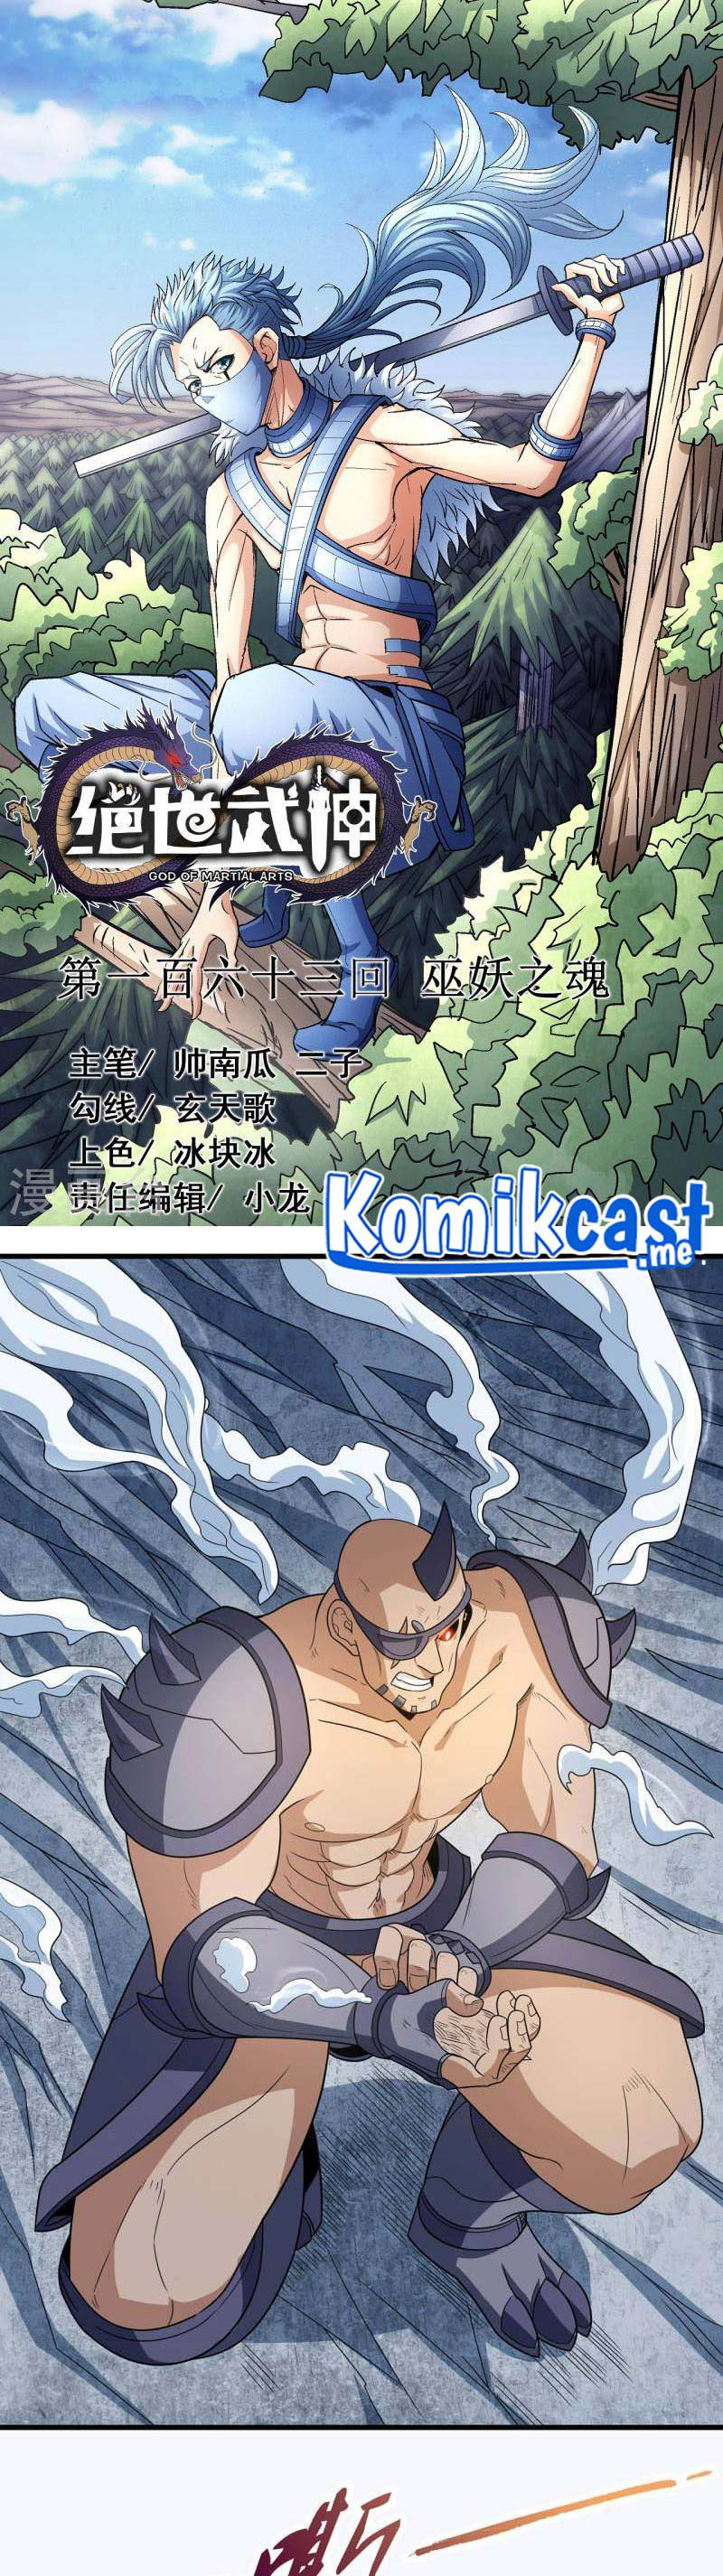 god-of-martial-arts Chapter 163-1